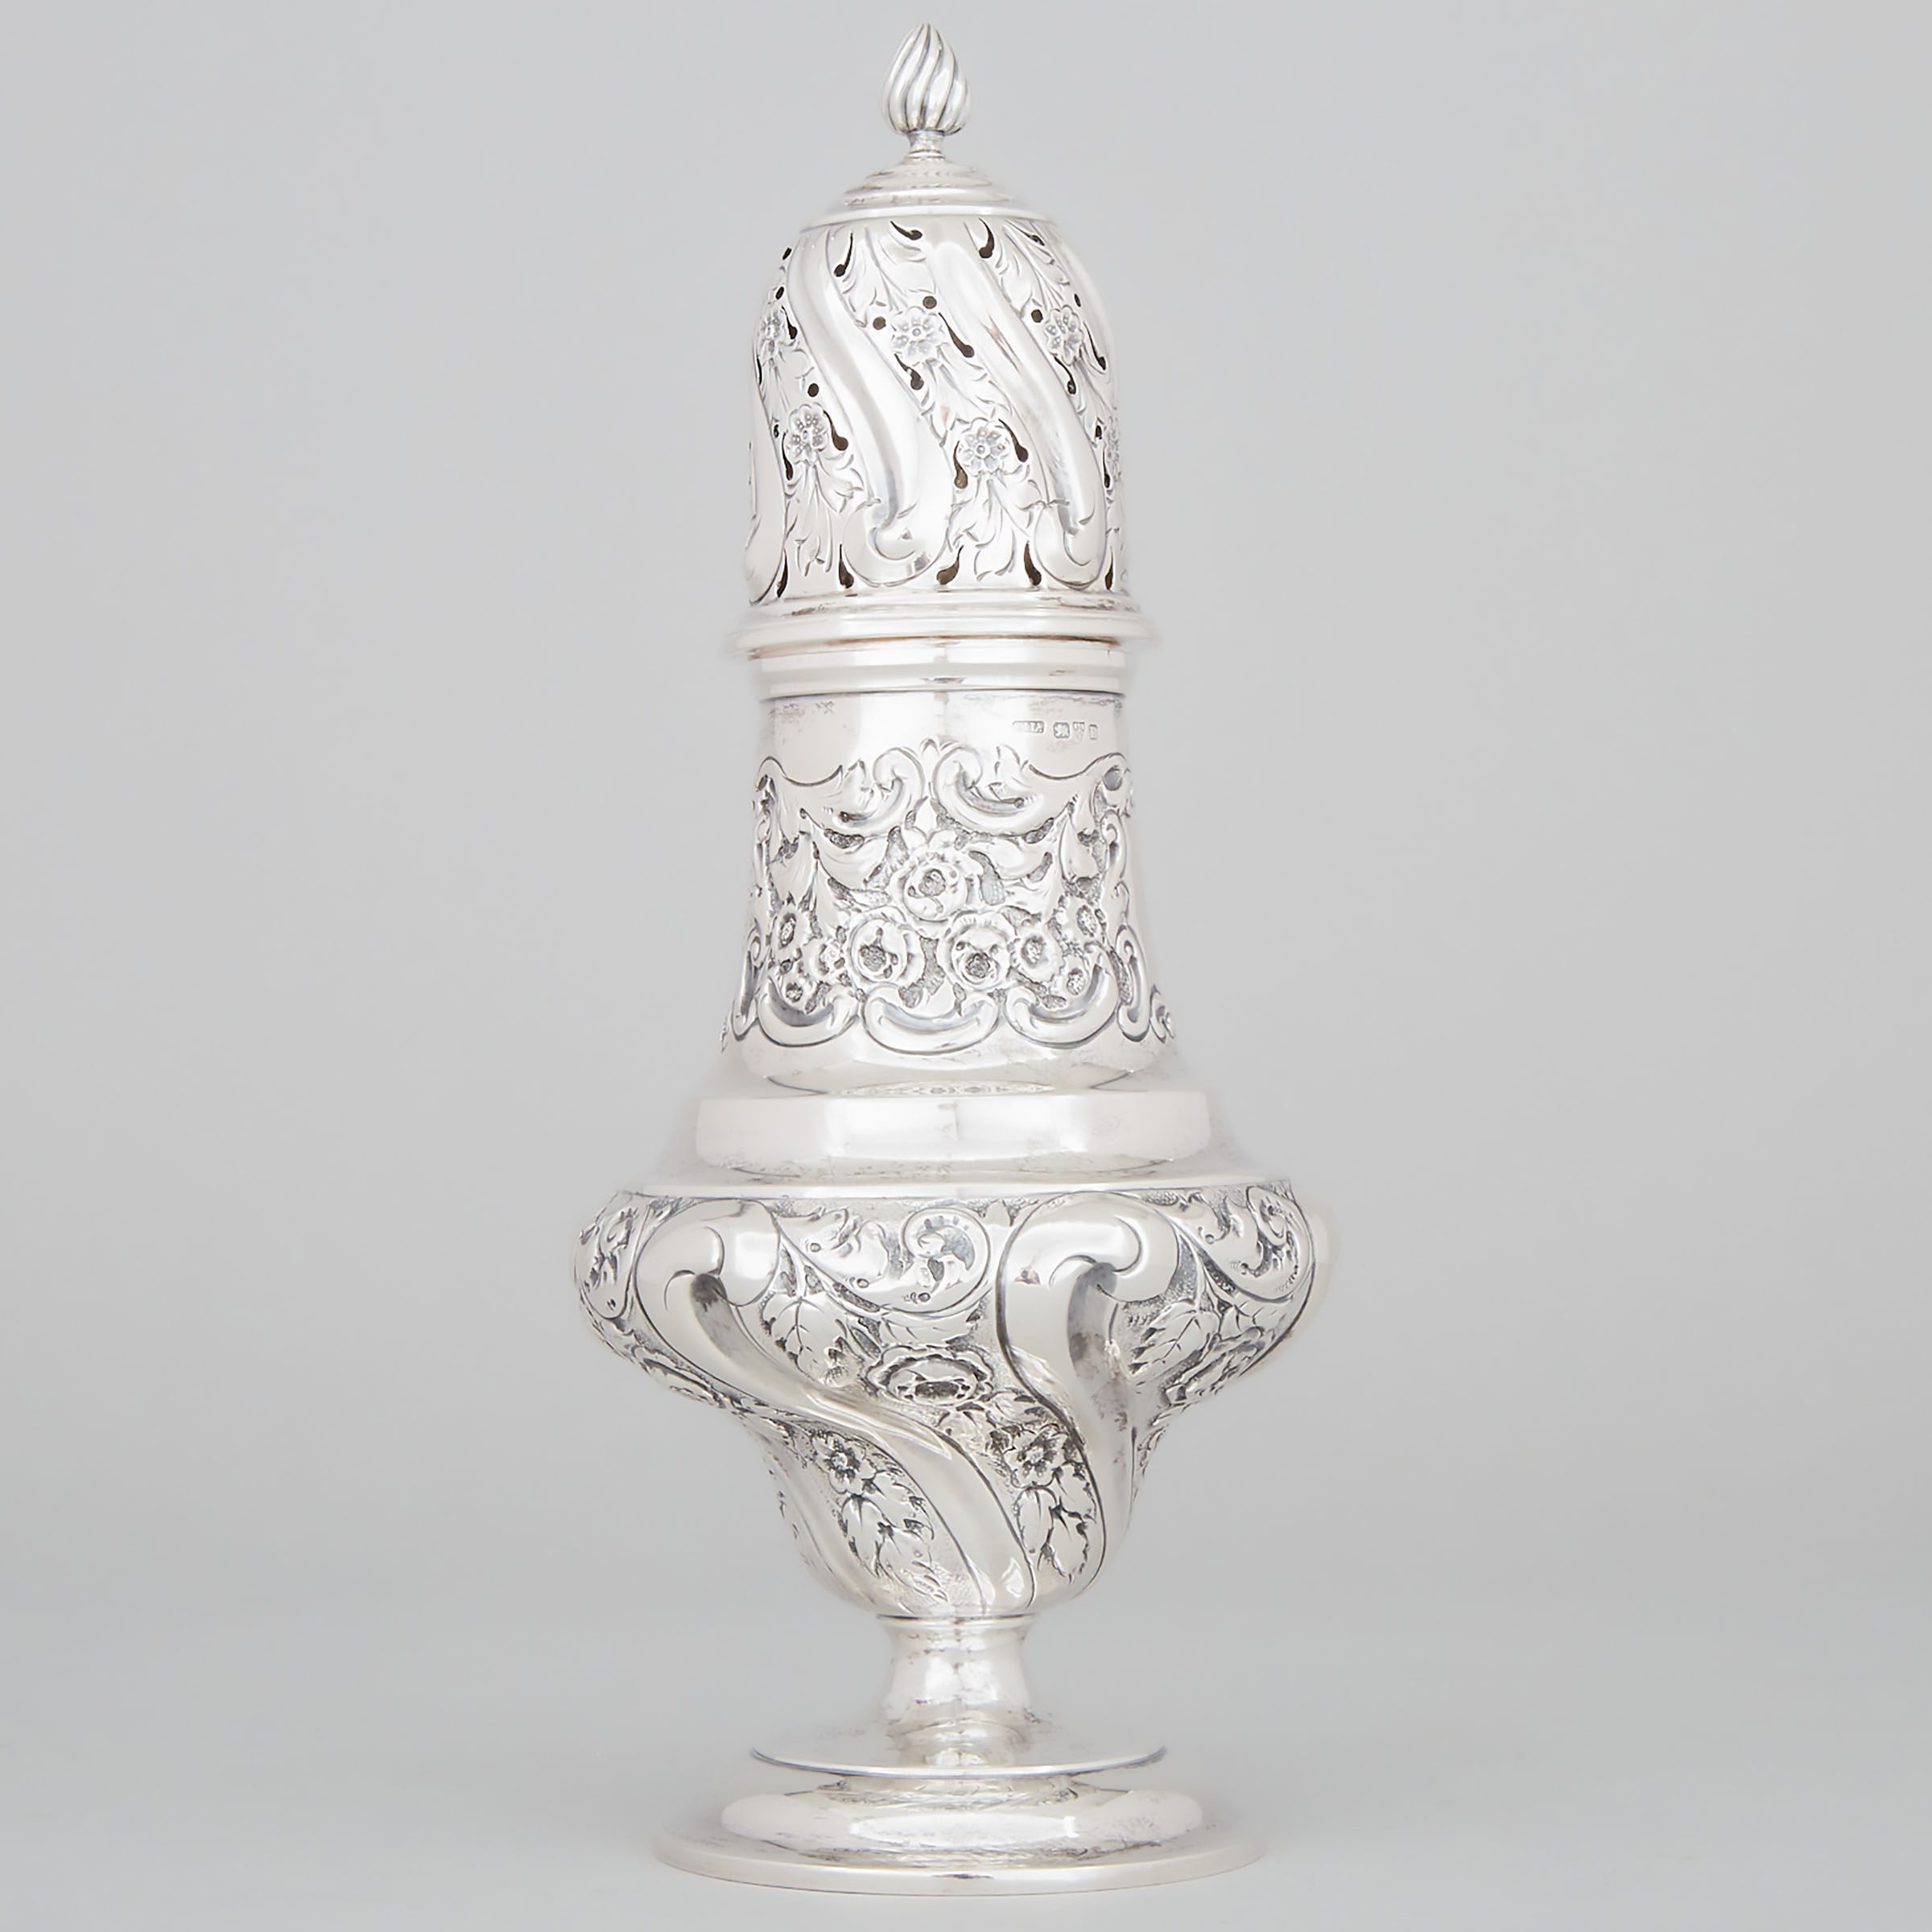 Late Victorian Silver Large Baluster Sugar Caster, Stokes & Ireland Ltd., Chester, 1900